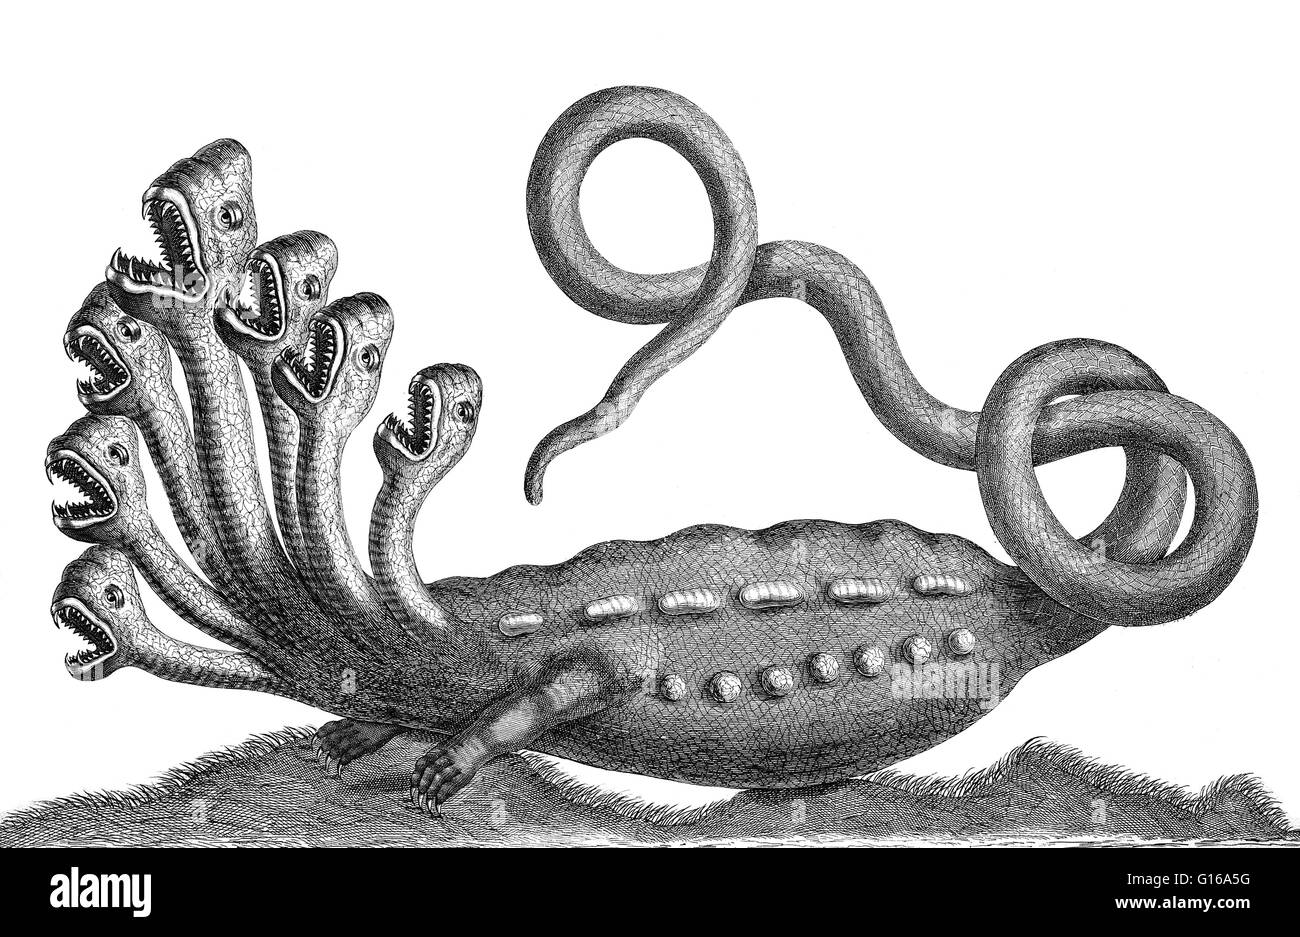 Detail of engraving from Locupletissimi Rerum Naturalium Thesauri by Albertus Seba, 1734. In Greek mythology, the Lernaean Hydra was an ancient serpent-like chthonic water beast, that possessed many heads (for each head cut off it grew two more), and dead Stock Photo